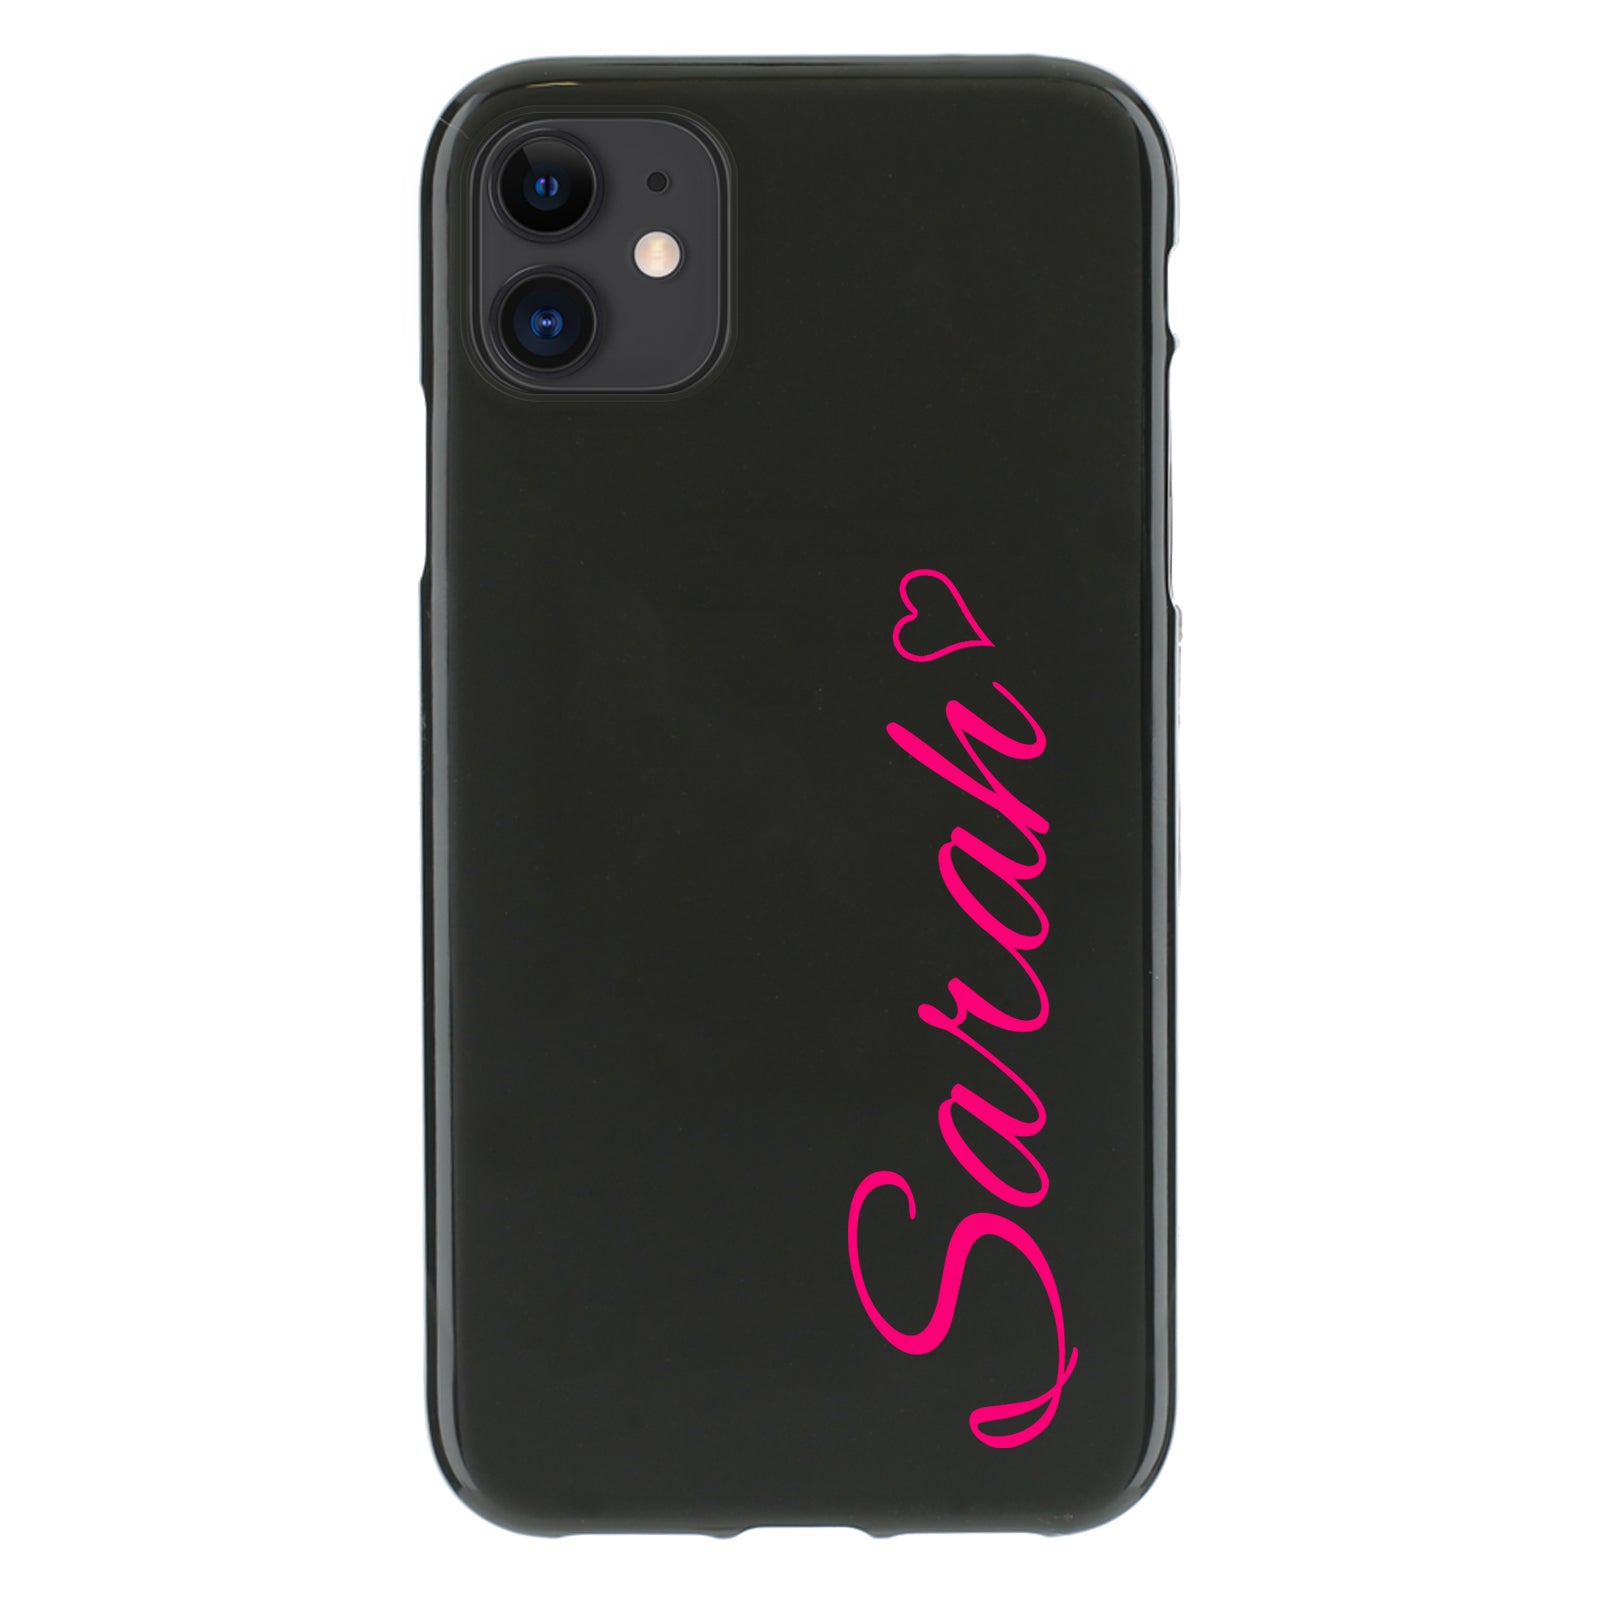 Personalised Huawei Phone Gel Case with Hot Pink Heart Accented Text